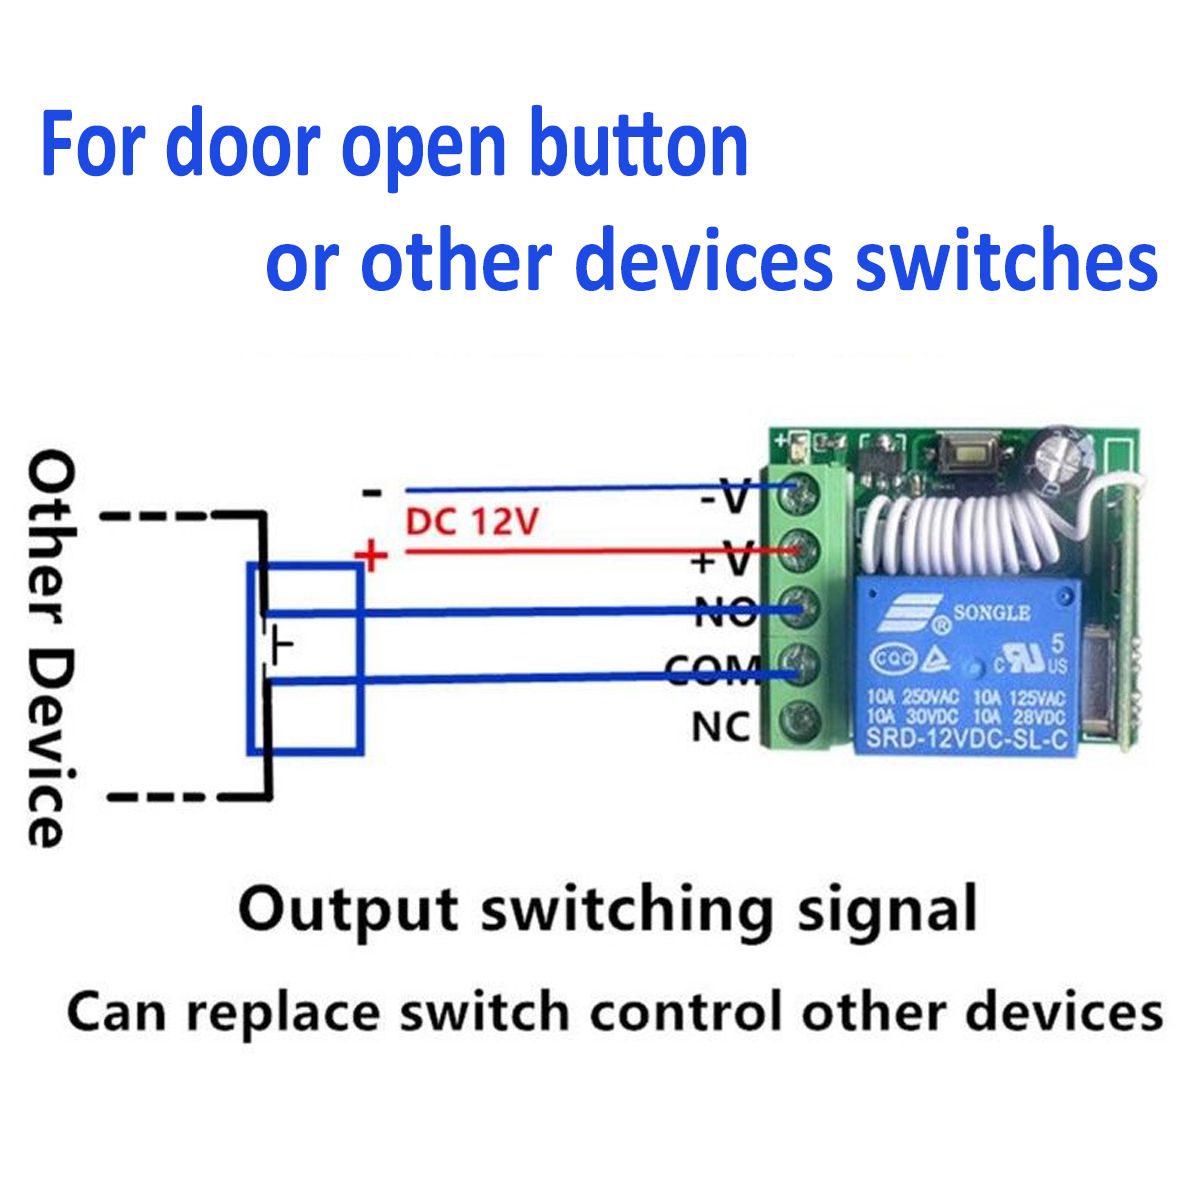 433Mhz-DC12V-1CH-Wireless-Remote-Control-Switch-Relay-Receiver-Module--2-RF-Transmitter-1326823